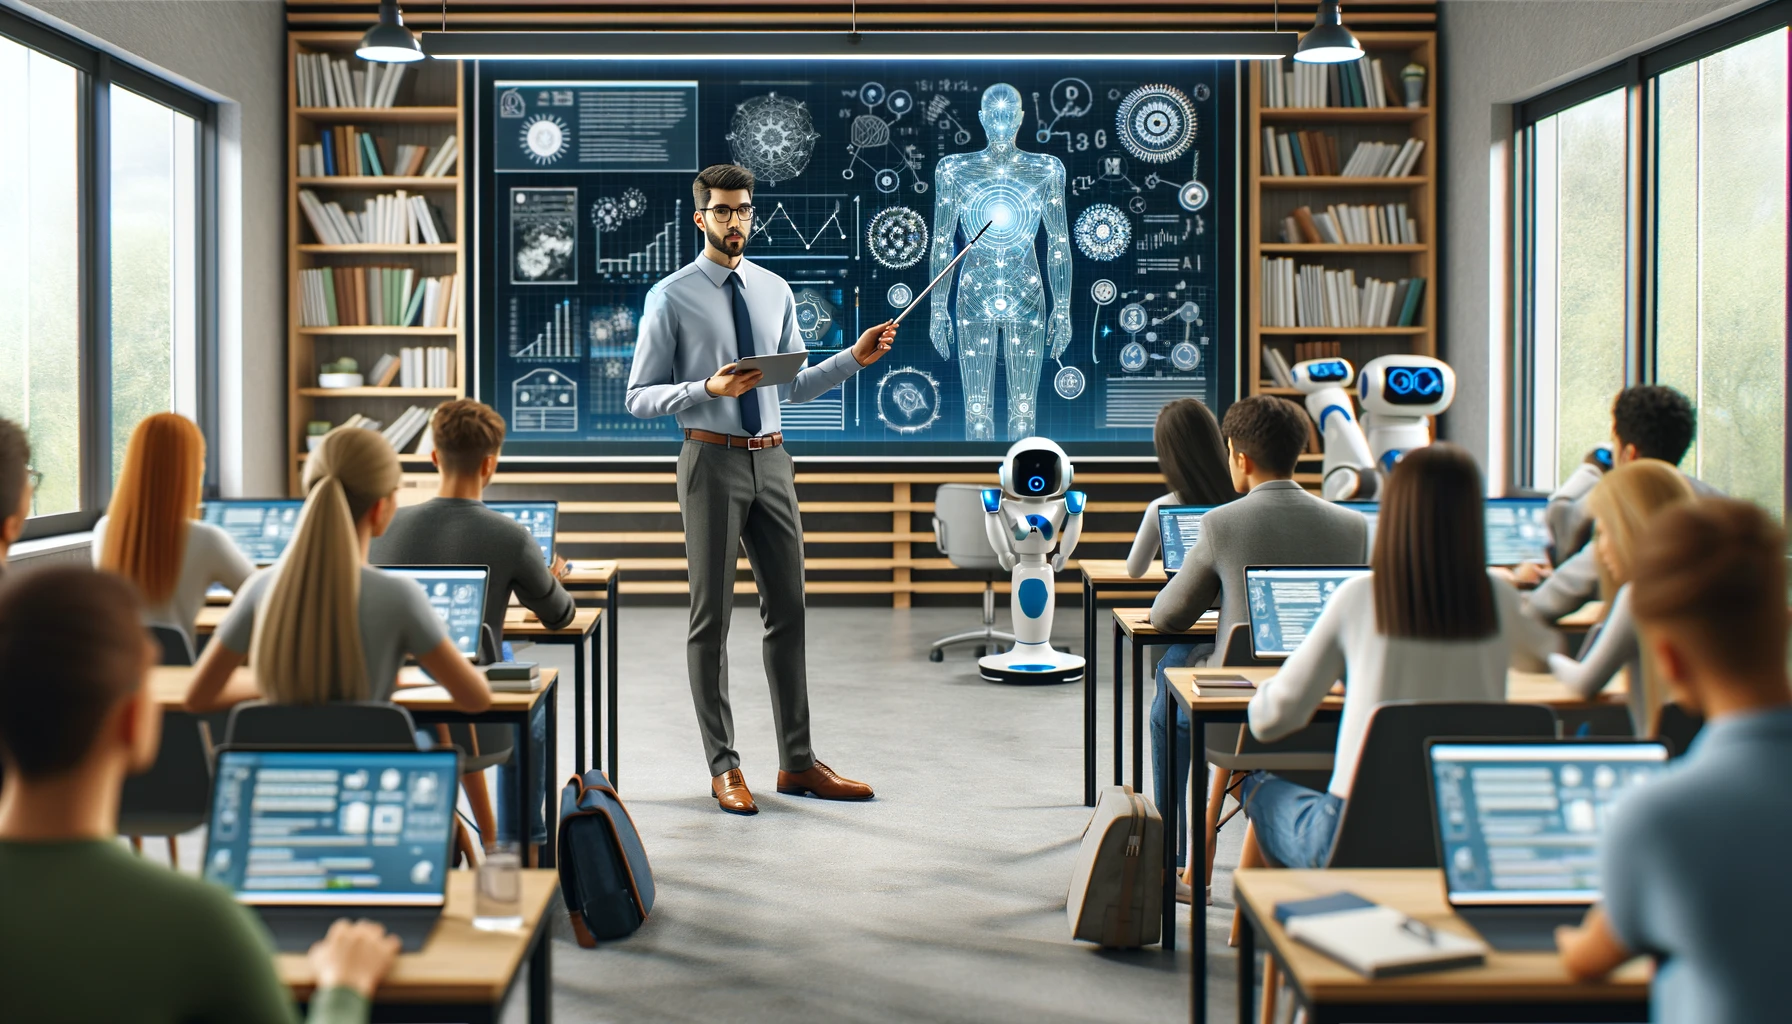 A realistic photograph of a male educator standing in a modern university classroom, filled with advanced technology. He is using an interactive smart.